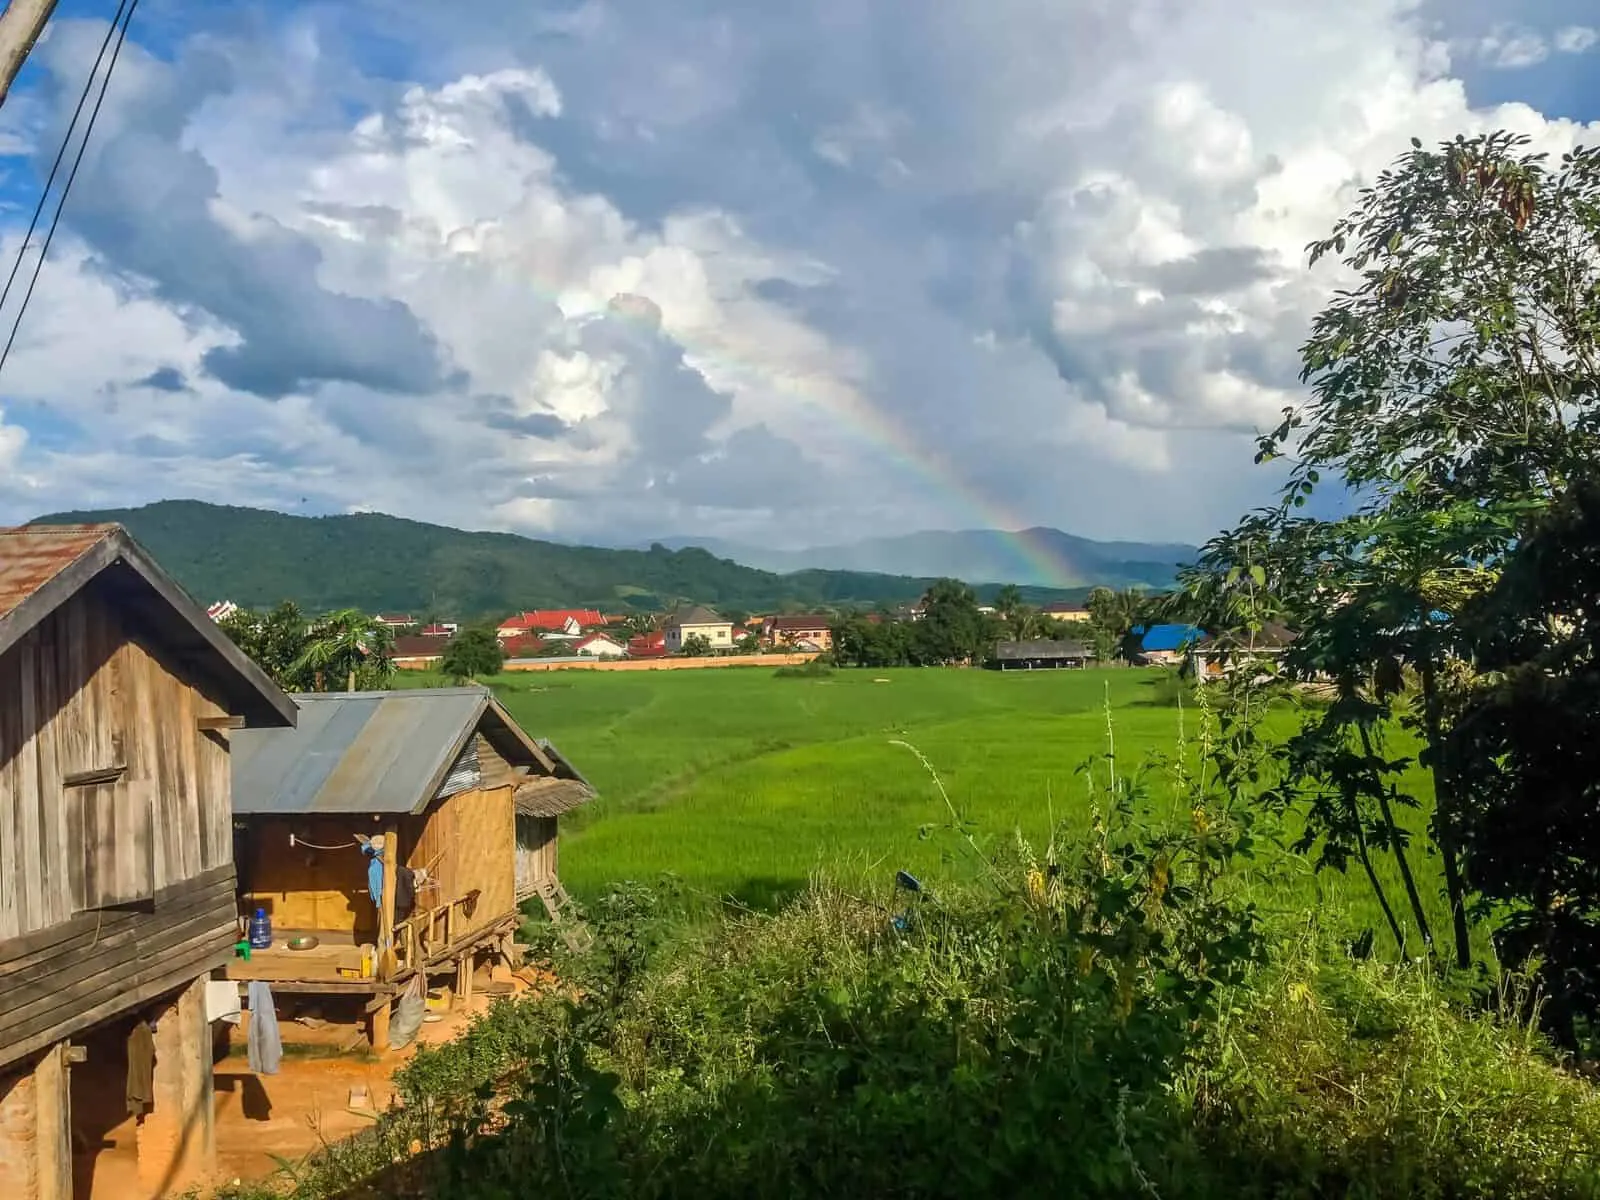 When visiting Luang Namtha, try to catch a rainbow on the hill!